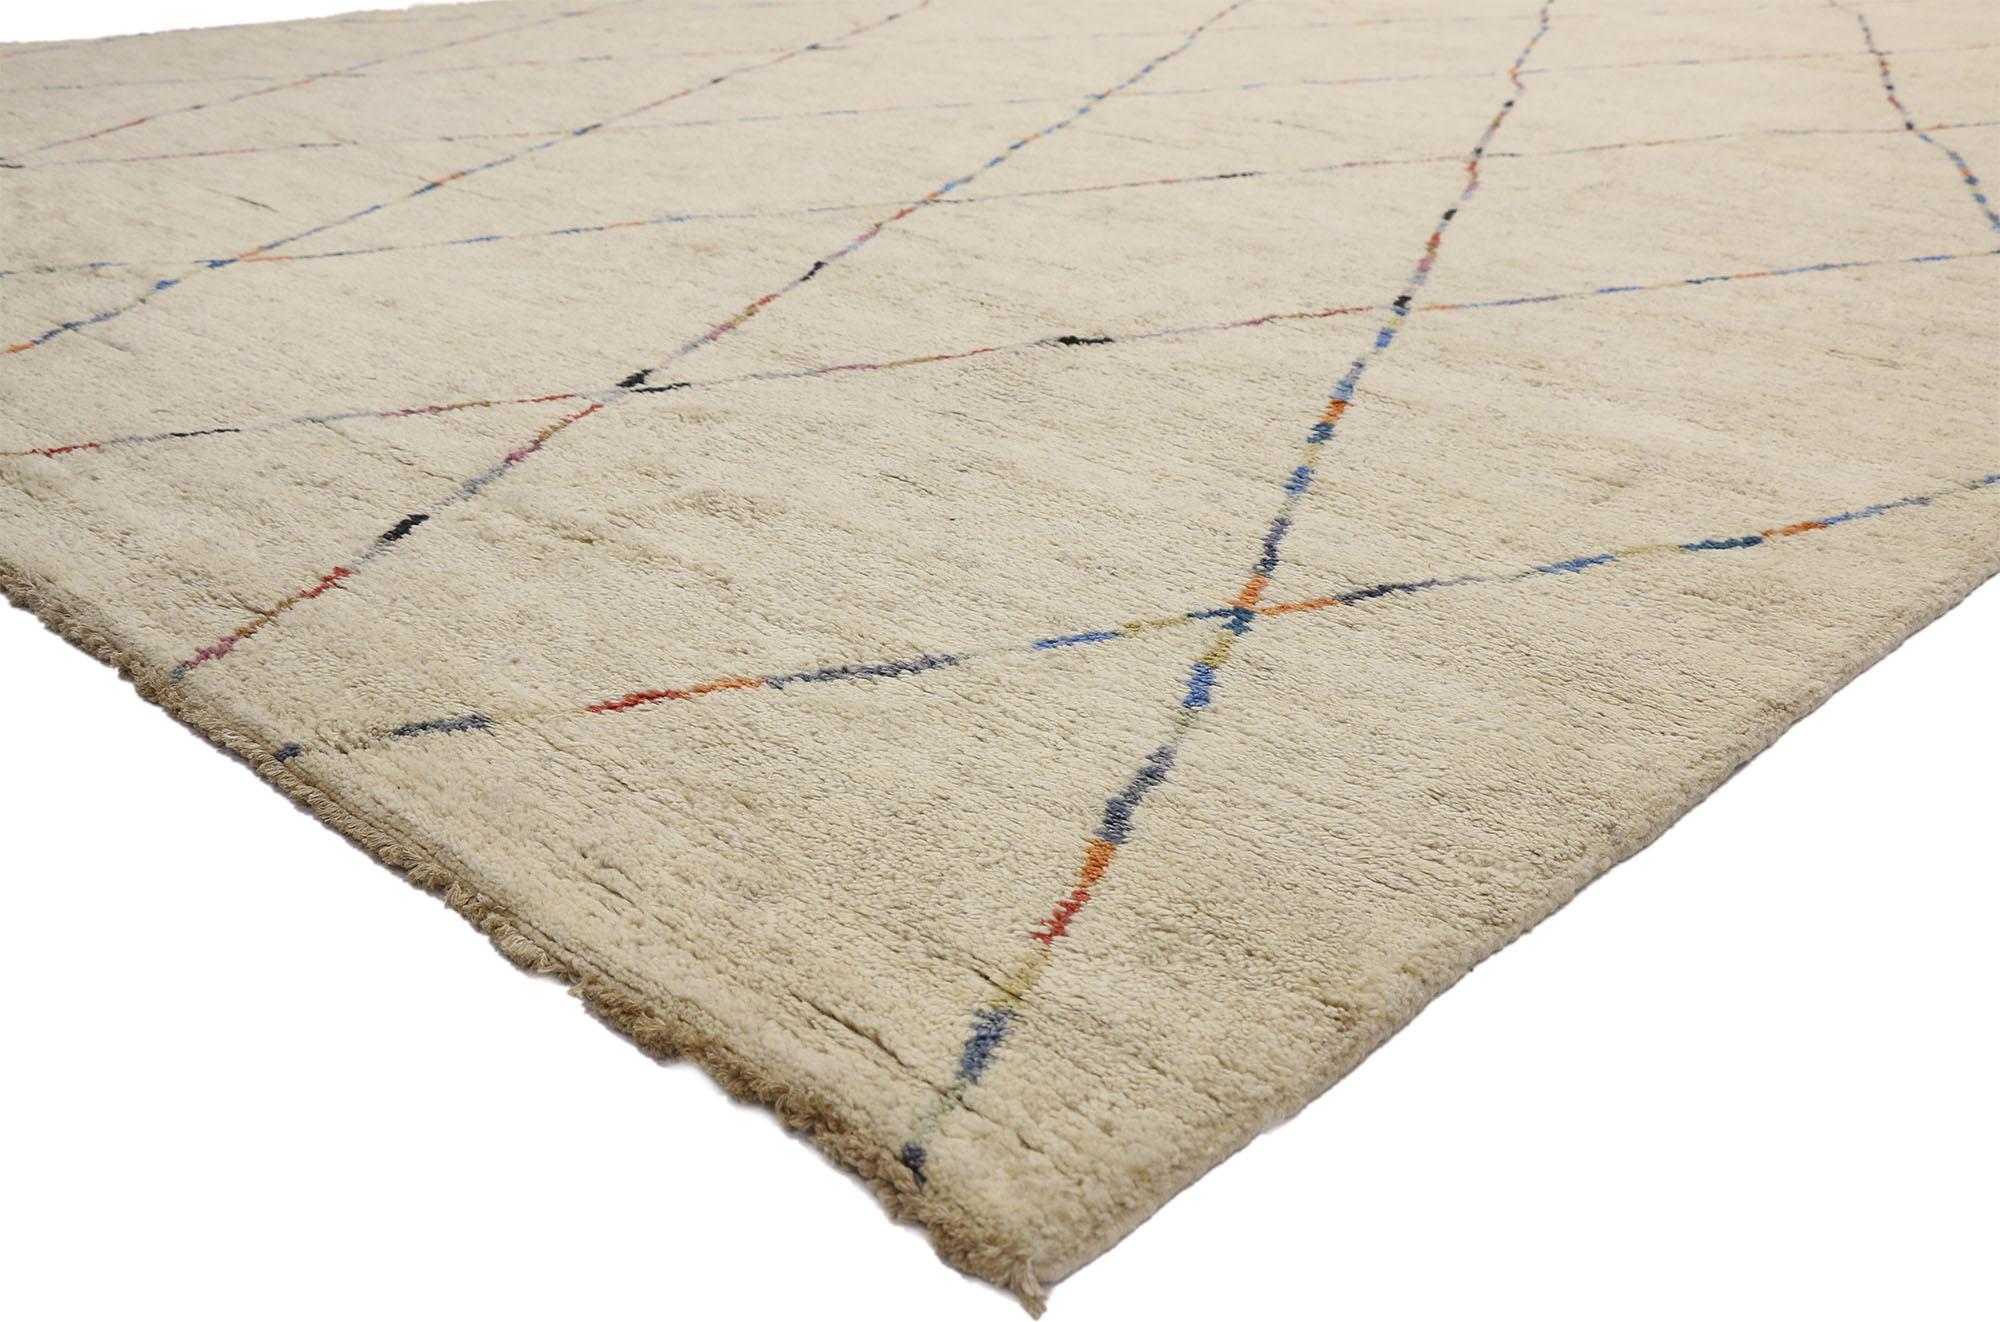 80468 Oversized Moroccan Rug, 12'05 x 19'08. 
In this hand-knotted wool oversized Moroccan rug, the fusion of Boho Chic and happy Hygge aesthetics creates a captivating canvas of woven beauty. Measuring nearly 12 x 20 feet, this large Moroccan area